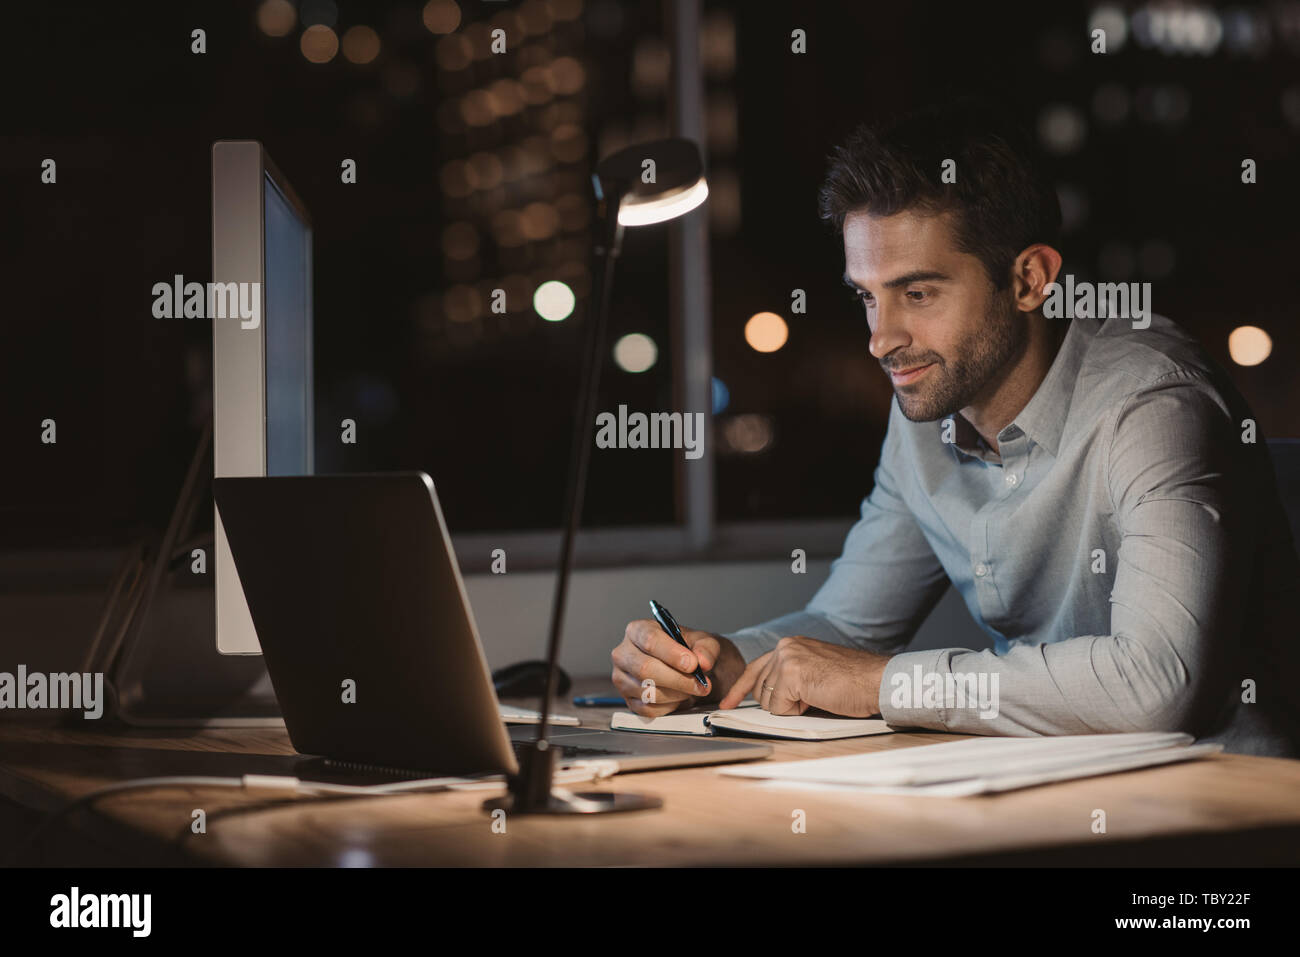 Young businessman writing down notes while working at night Stock Photo